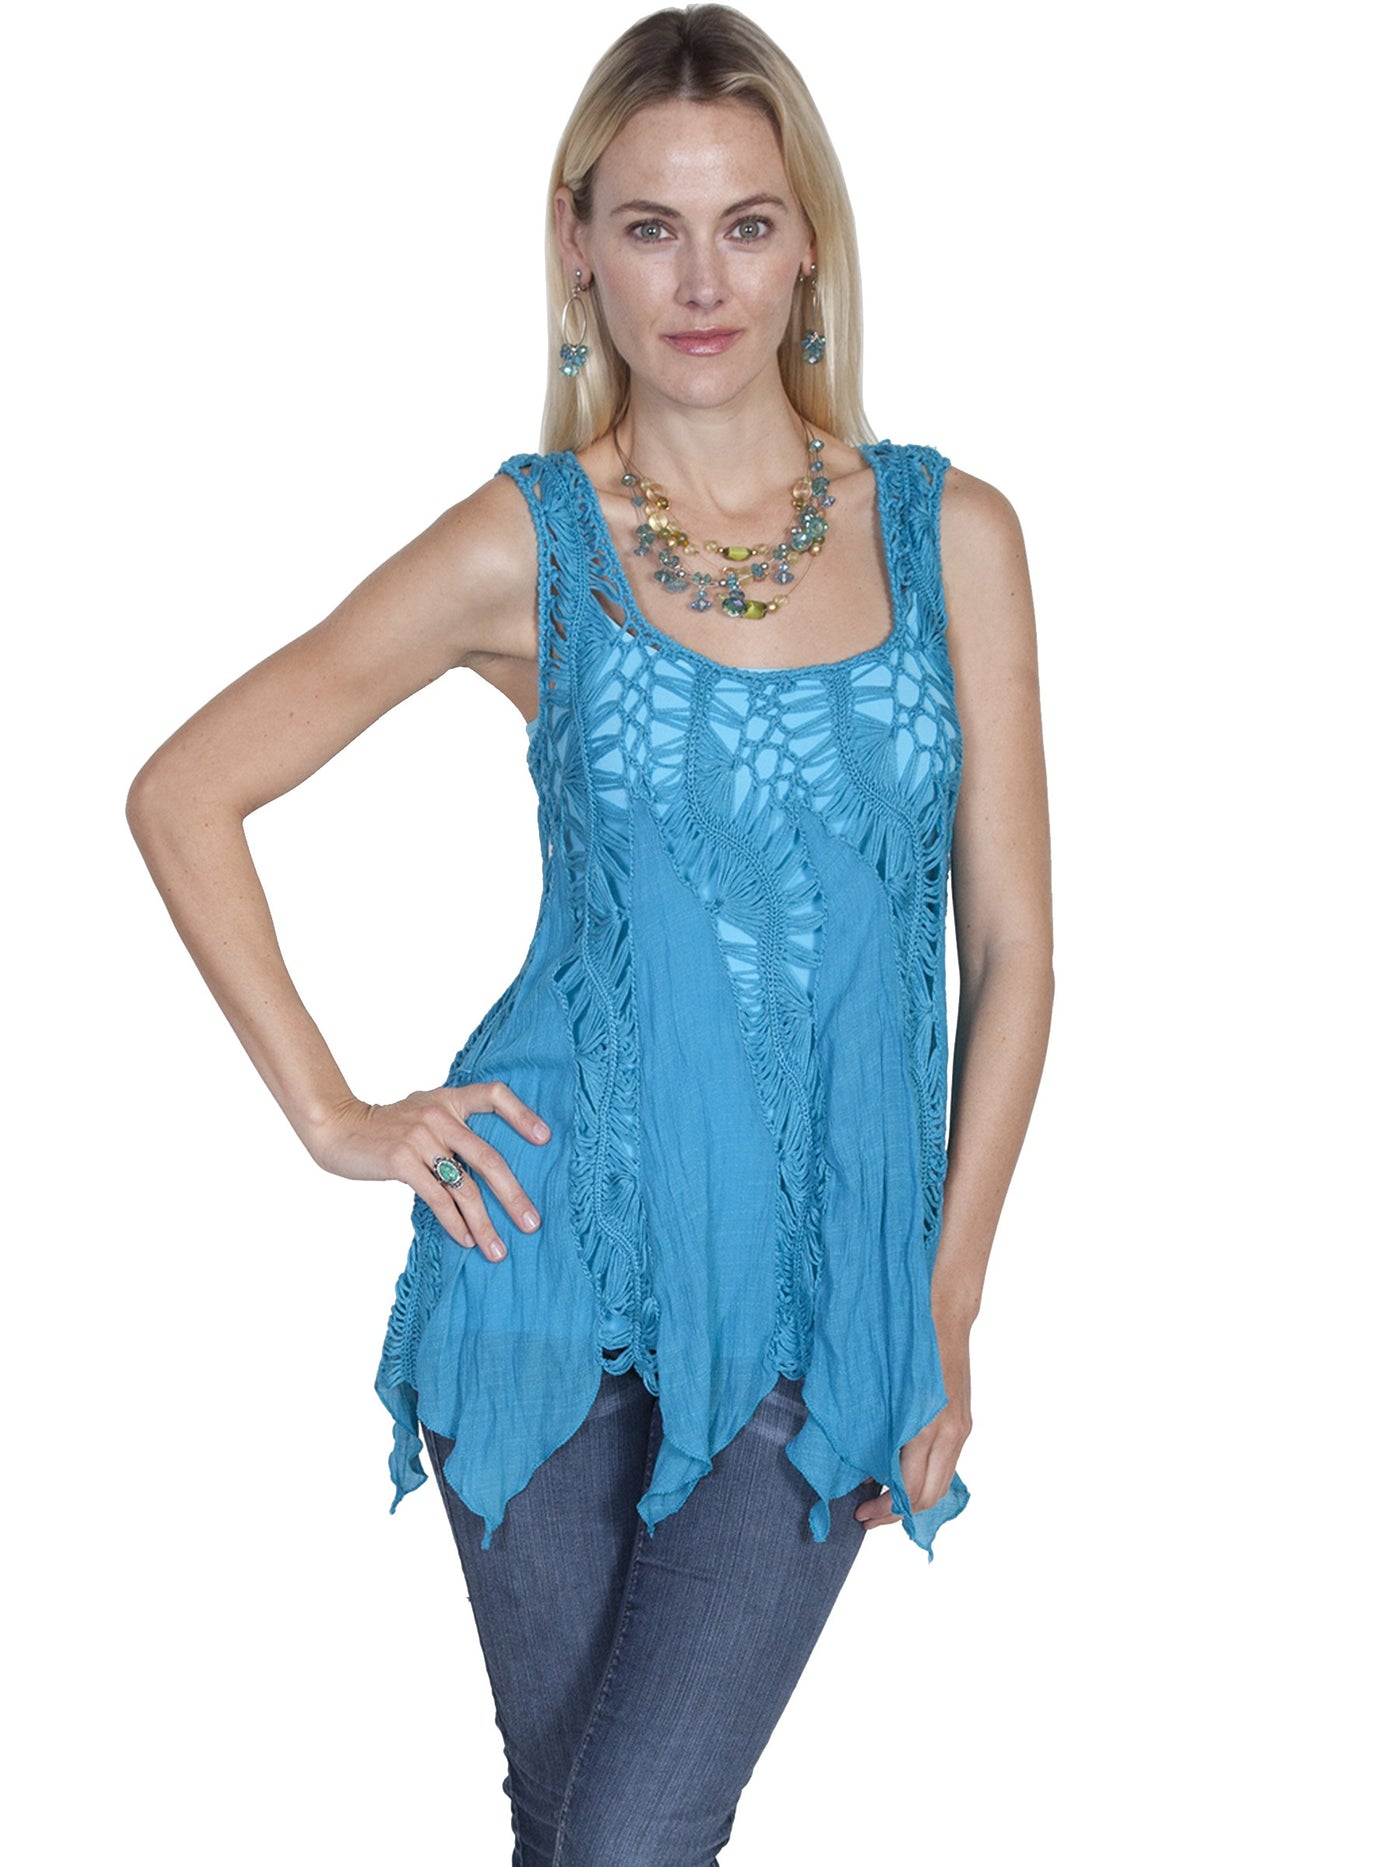 Vintage Inspired Crochet Top in Blue - SOLD OUT